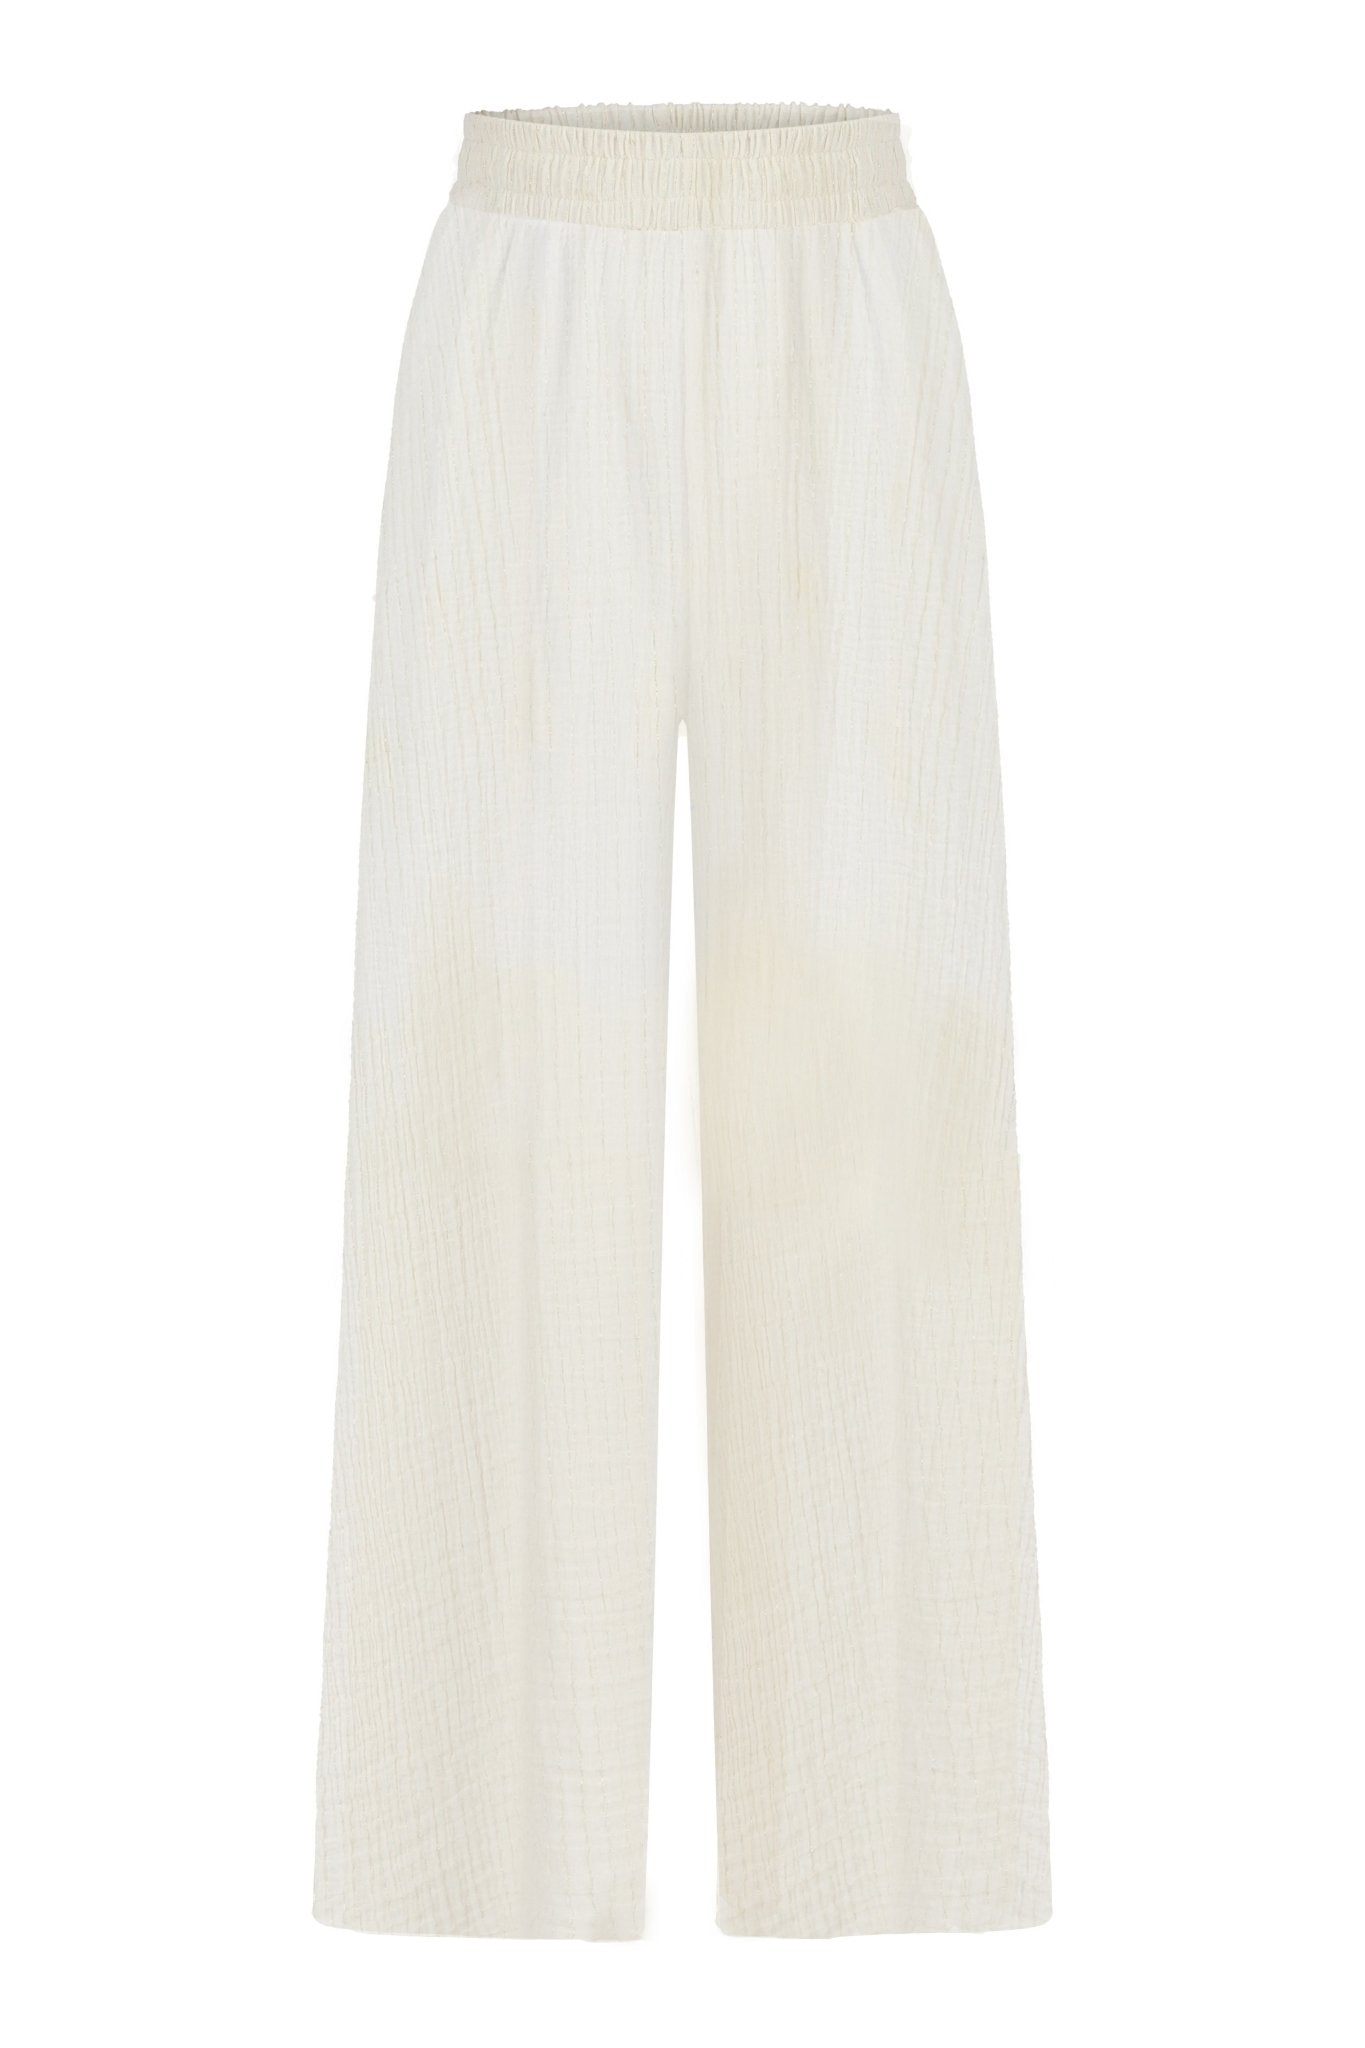 Skye Palazzo Pants - Natural With Gold Stripes by The Handloom